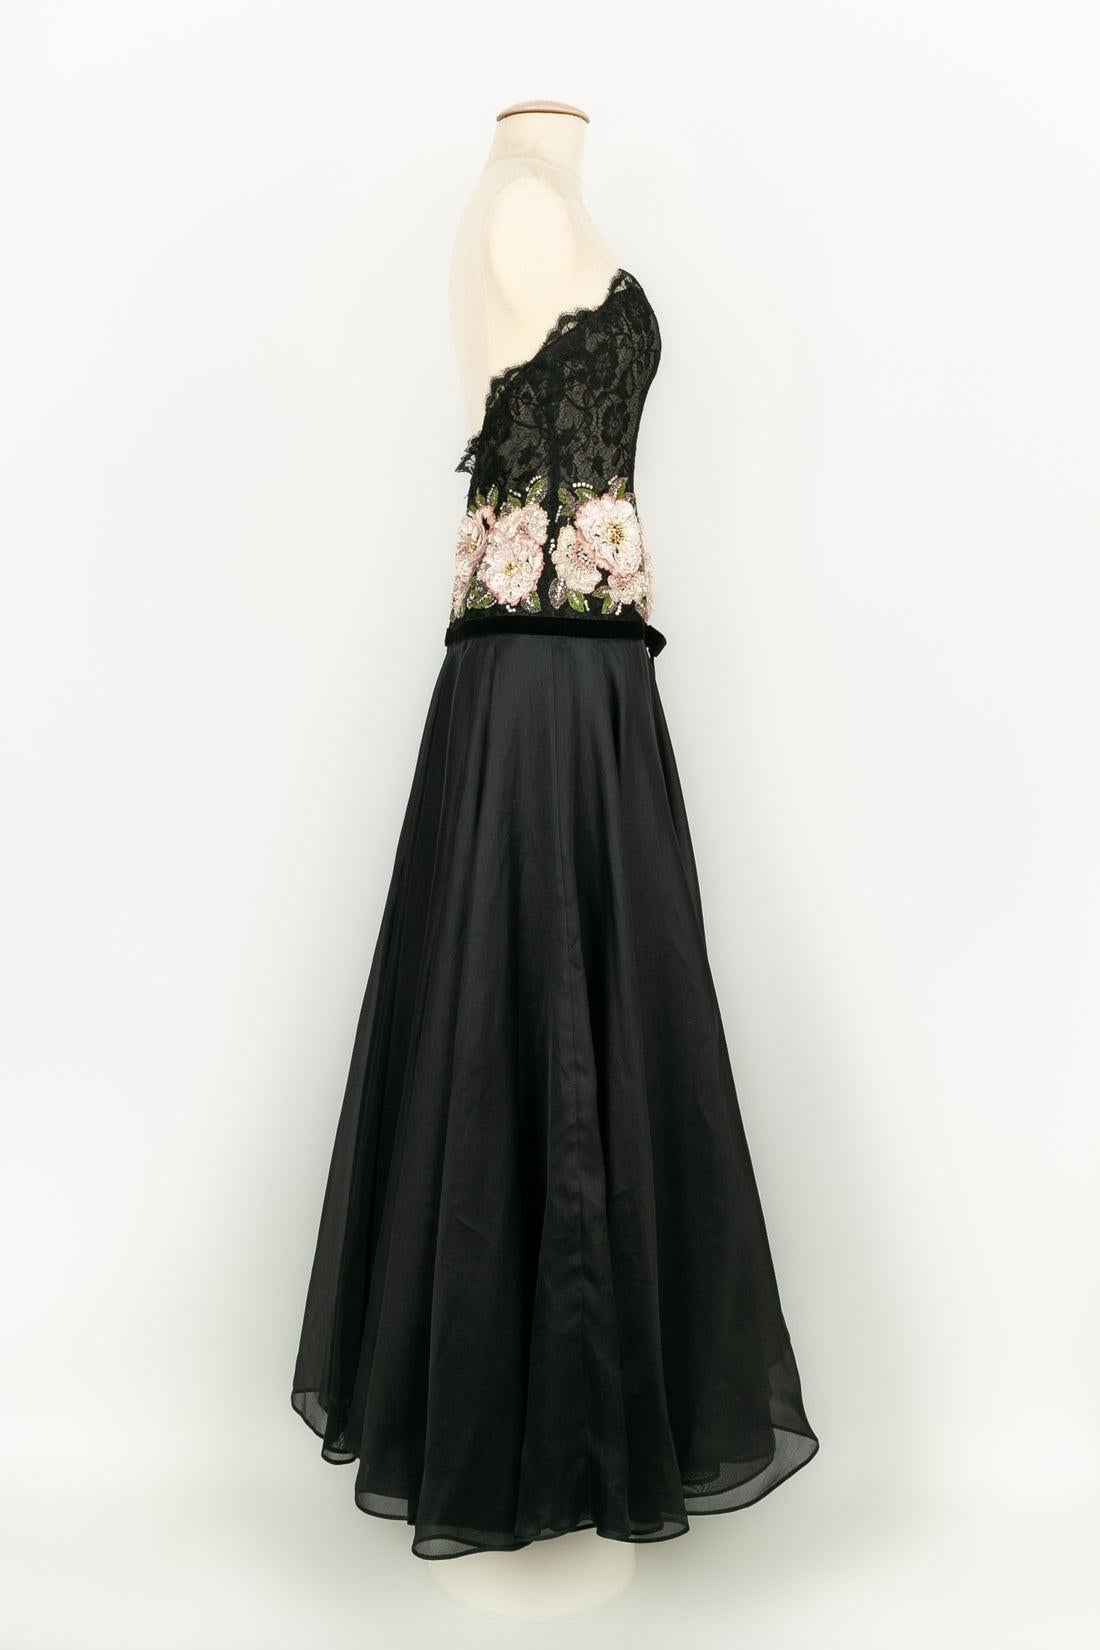 Valentino - Bustier dress in black silk and taffeta embroidered with pearlized flowers. No size nor composition label, it fits a 36FR/38FR.

Additional information:
Condition: Very good condition
Dimensions: Chest: 40 cm - Waist: 35 cm - Length: 130